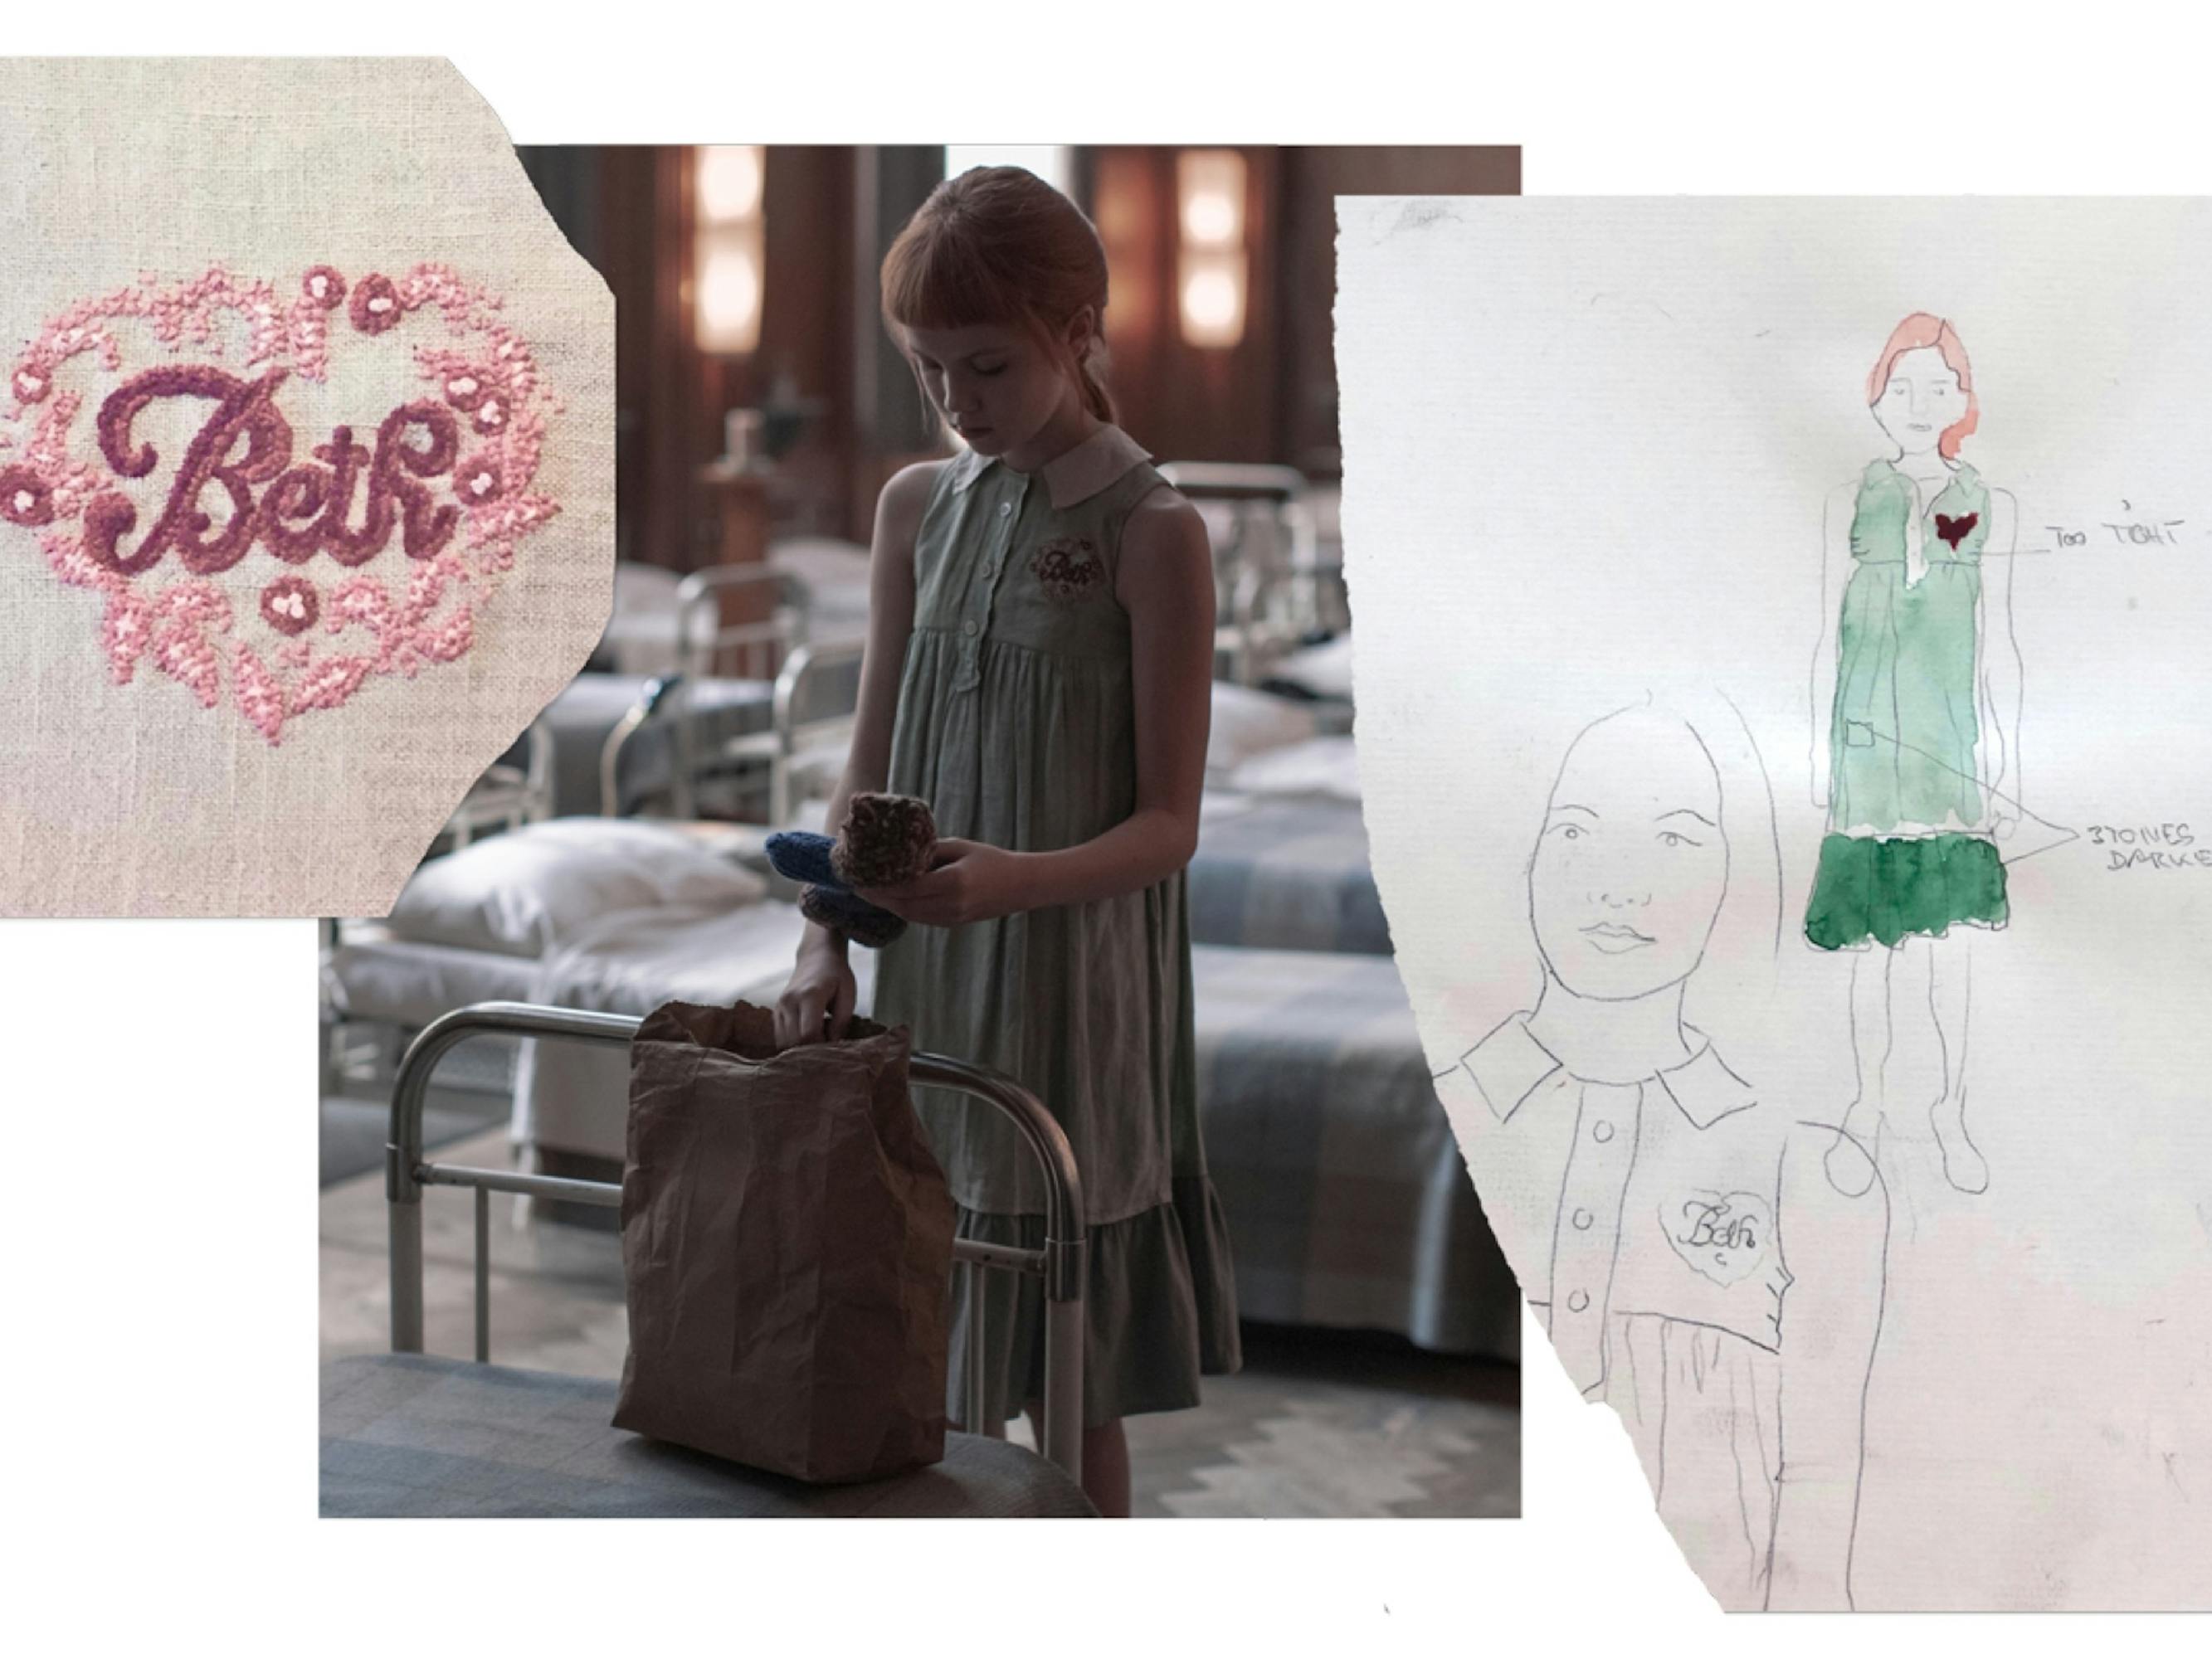 Young Beth Harmon arrives at the orphanage in a green linen dress, which she’ll soon be forced to swap for pinafores, pinafores, pinafores. A still from the series is matched with its corresponding costume sketch, accented with watercolor.